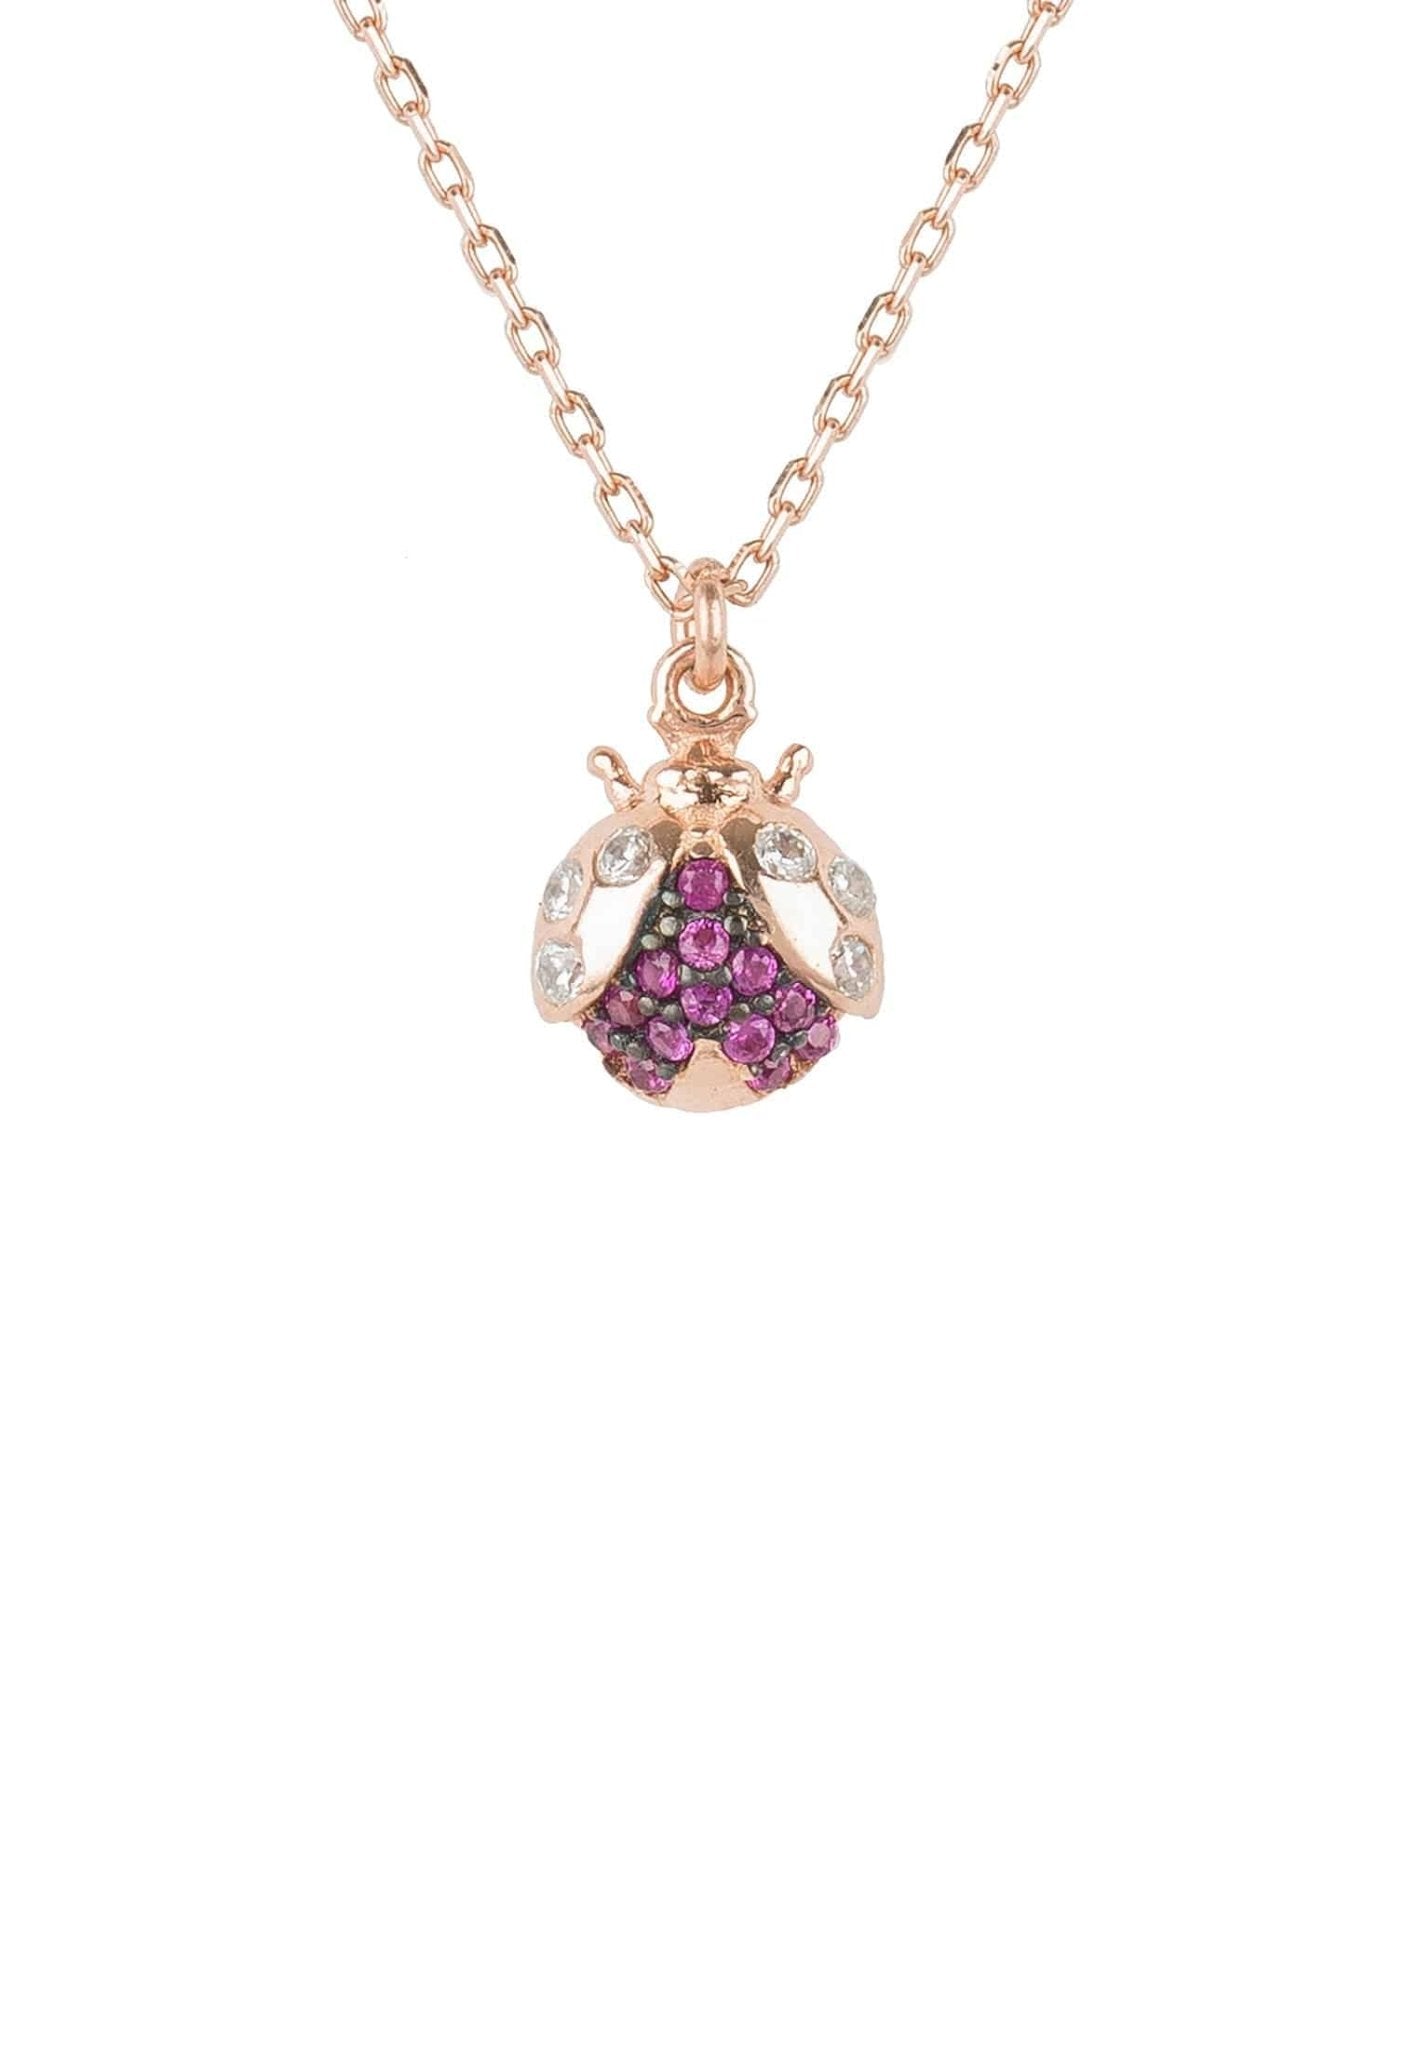 Lady Bug Ladybird Pendant Necklace Rosegold - Allure SocietyNecklaces